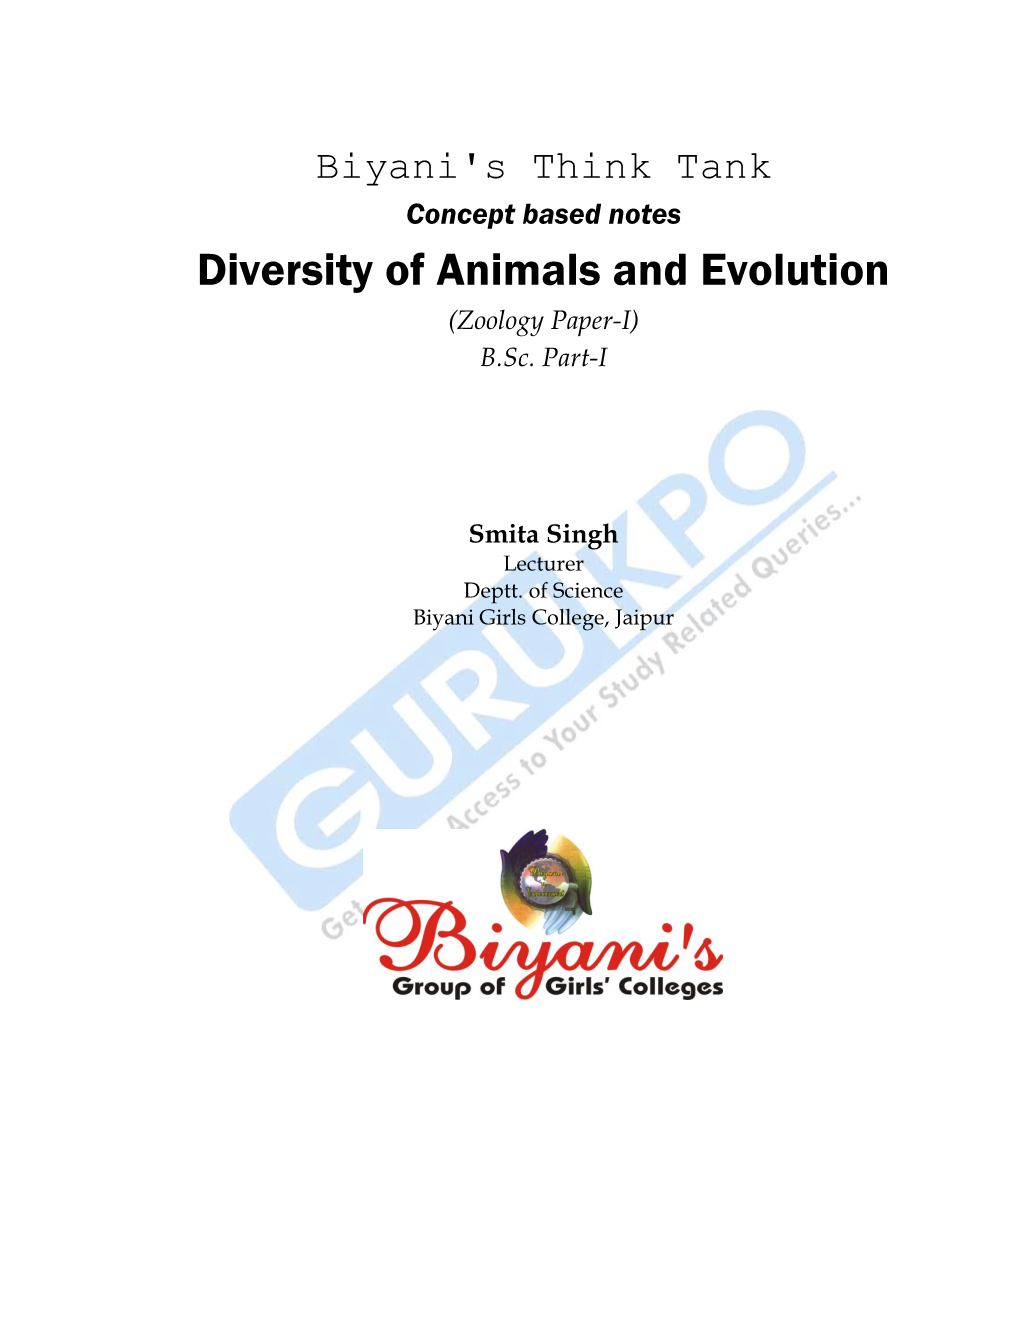 Diversity of Animals and Evolution (Zoology Paper-I) B.Sc